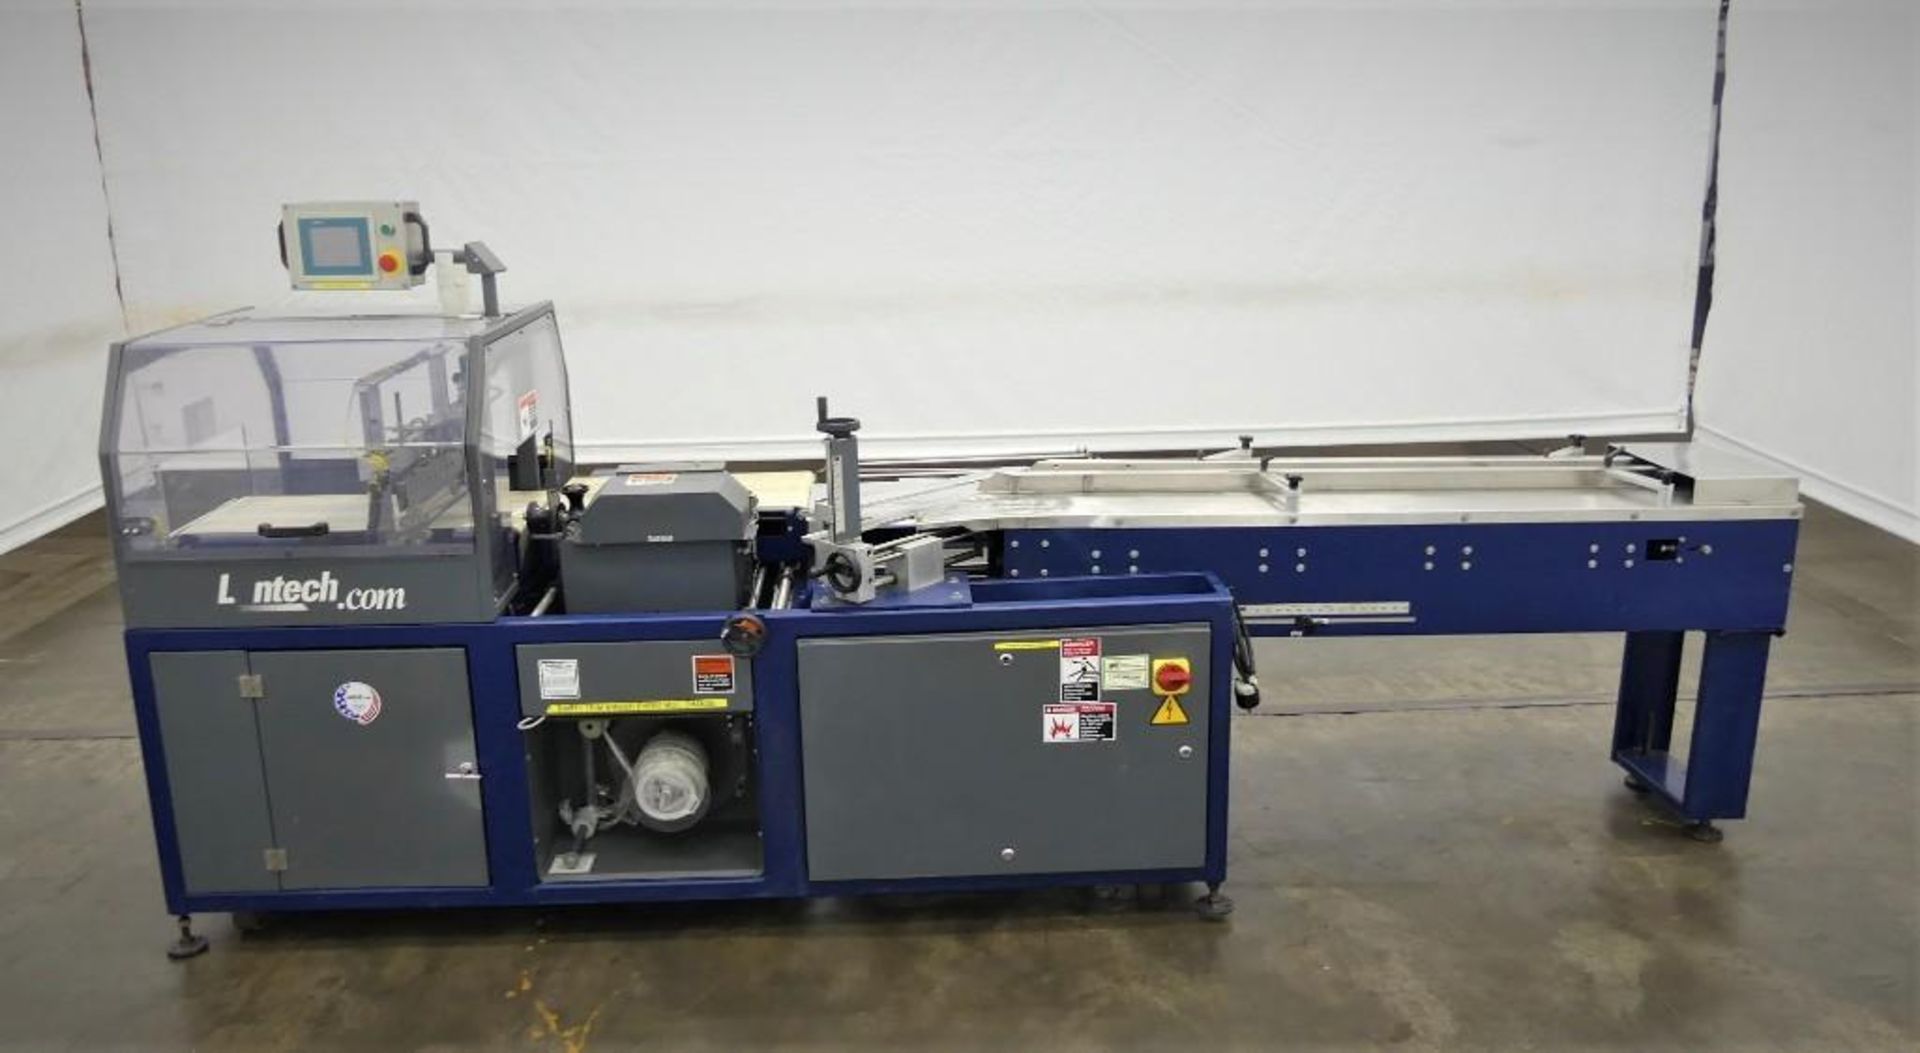 Lantech 200 Side Sealer Includes all parts, electronic components, manuals, etc